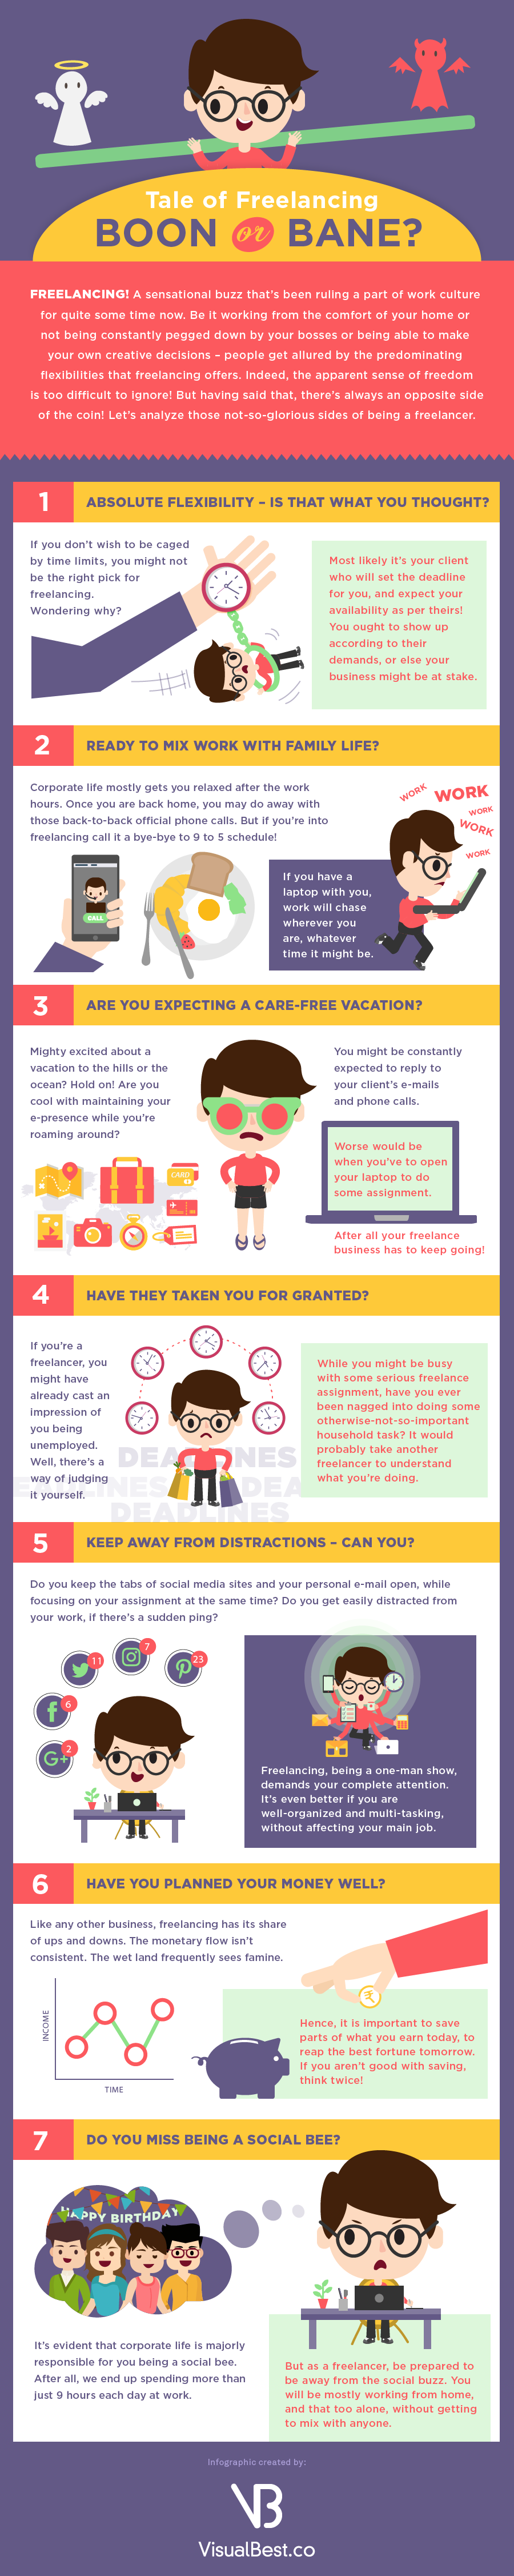 Tale of Freelancing: Boon or Bane? - #Infographic